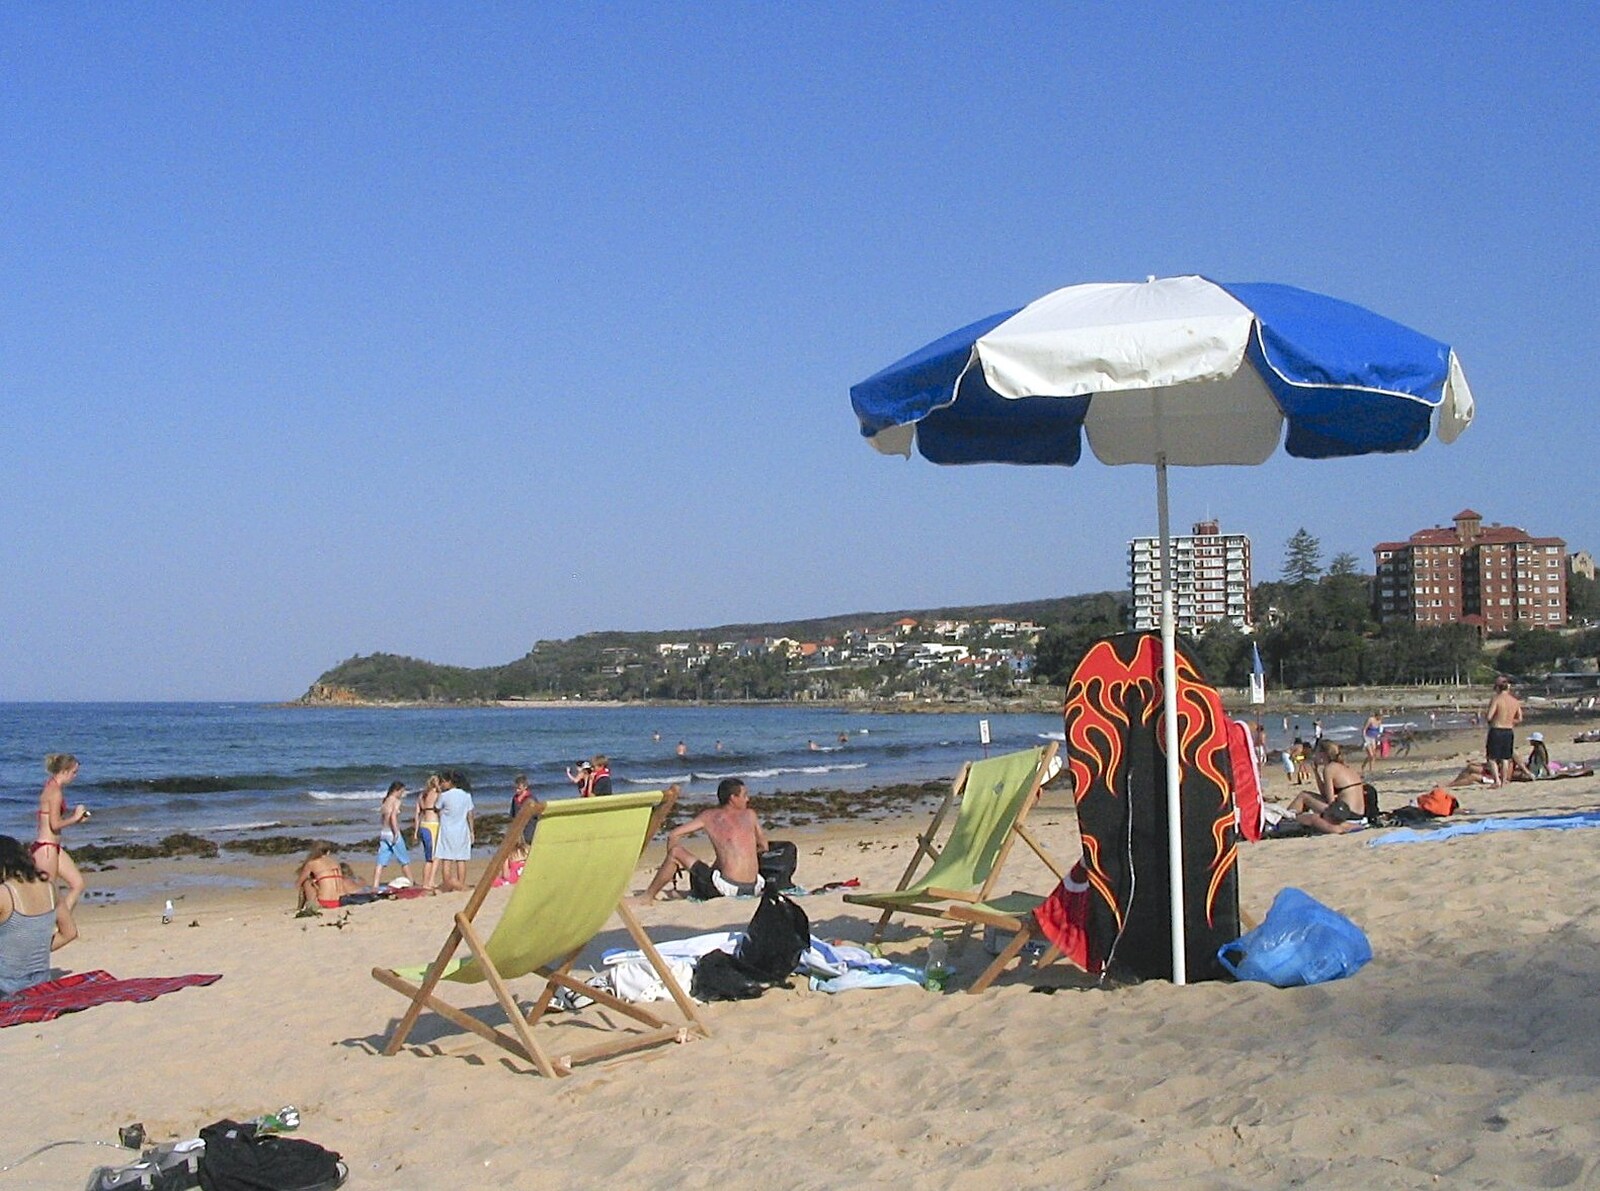 On the beach from Sydney, New South Wales, Australia - 10th October 2004